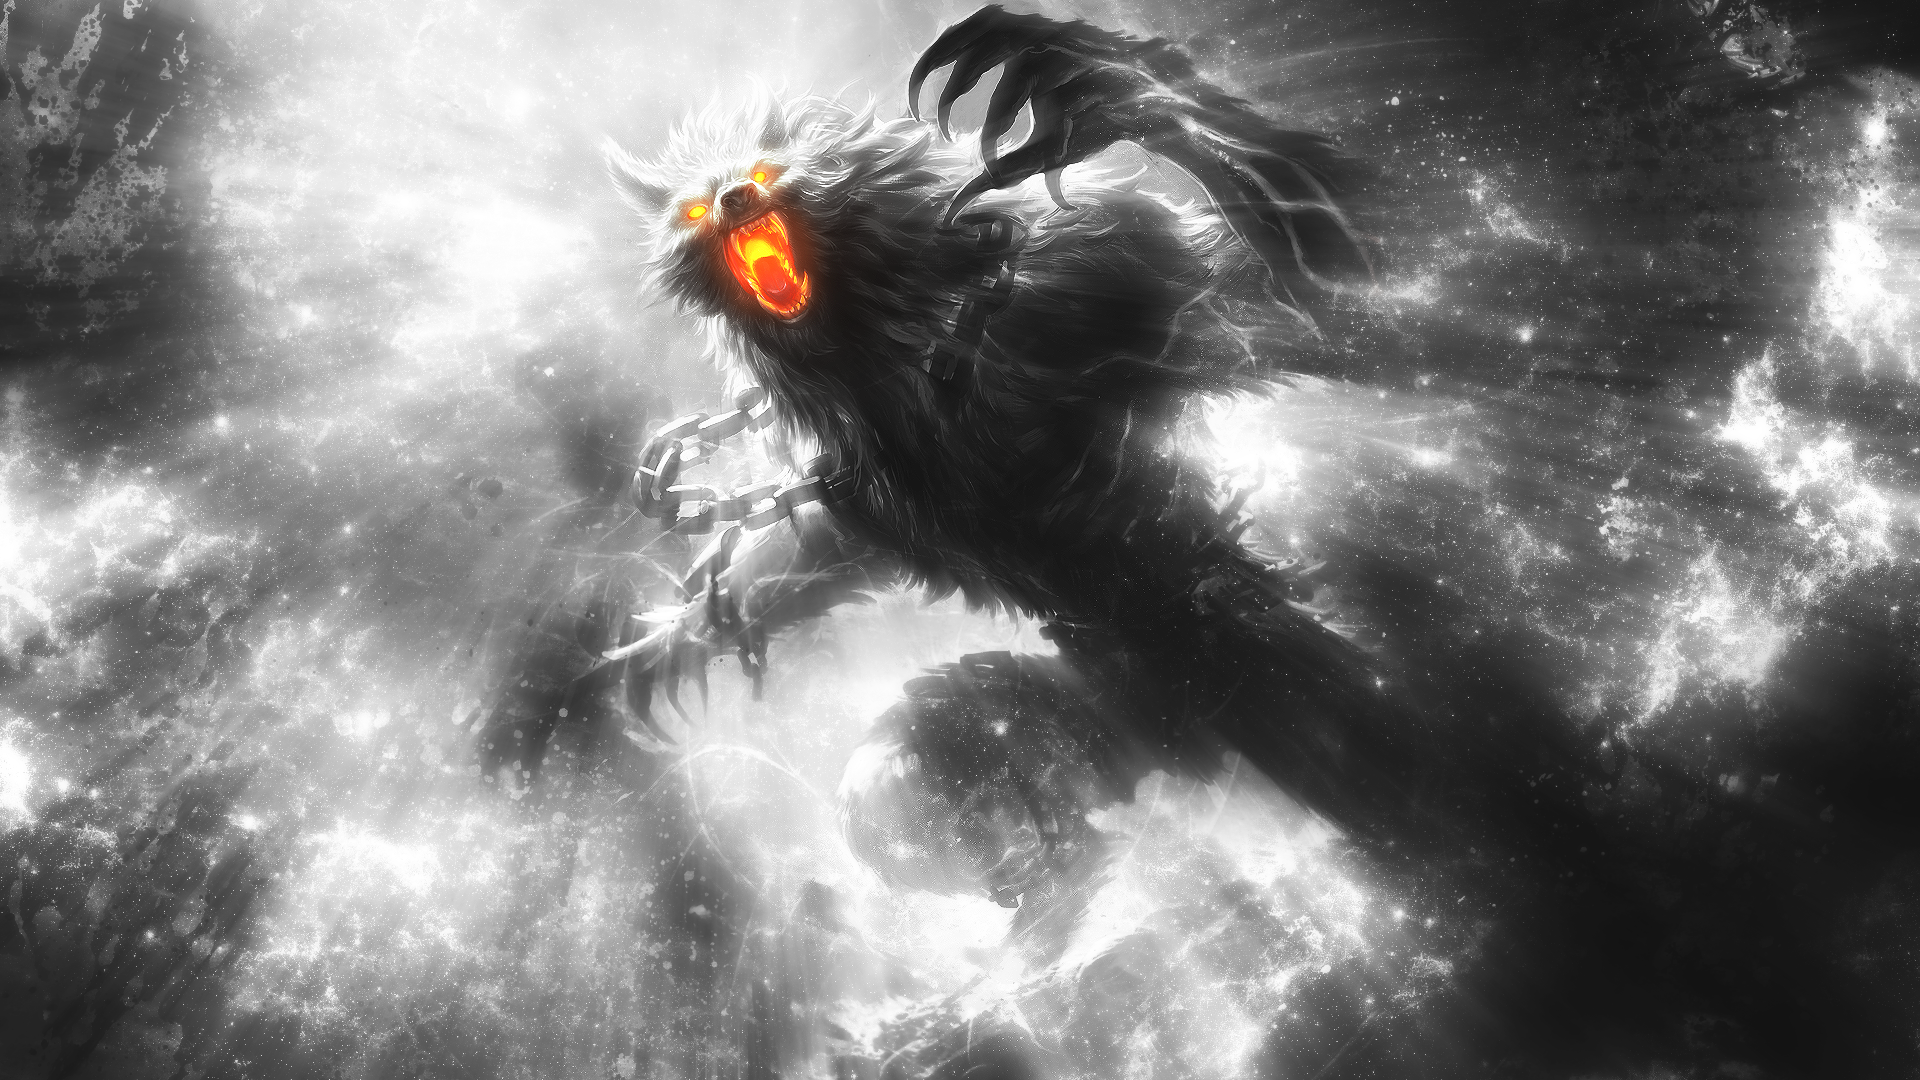 General 1920x1080 Fenrir Smite creature werewolves fantasy art selective coloring glowing eyes chains video game art video games PC gaming